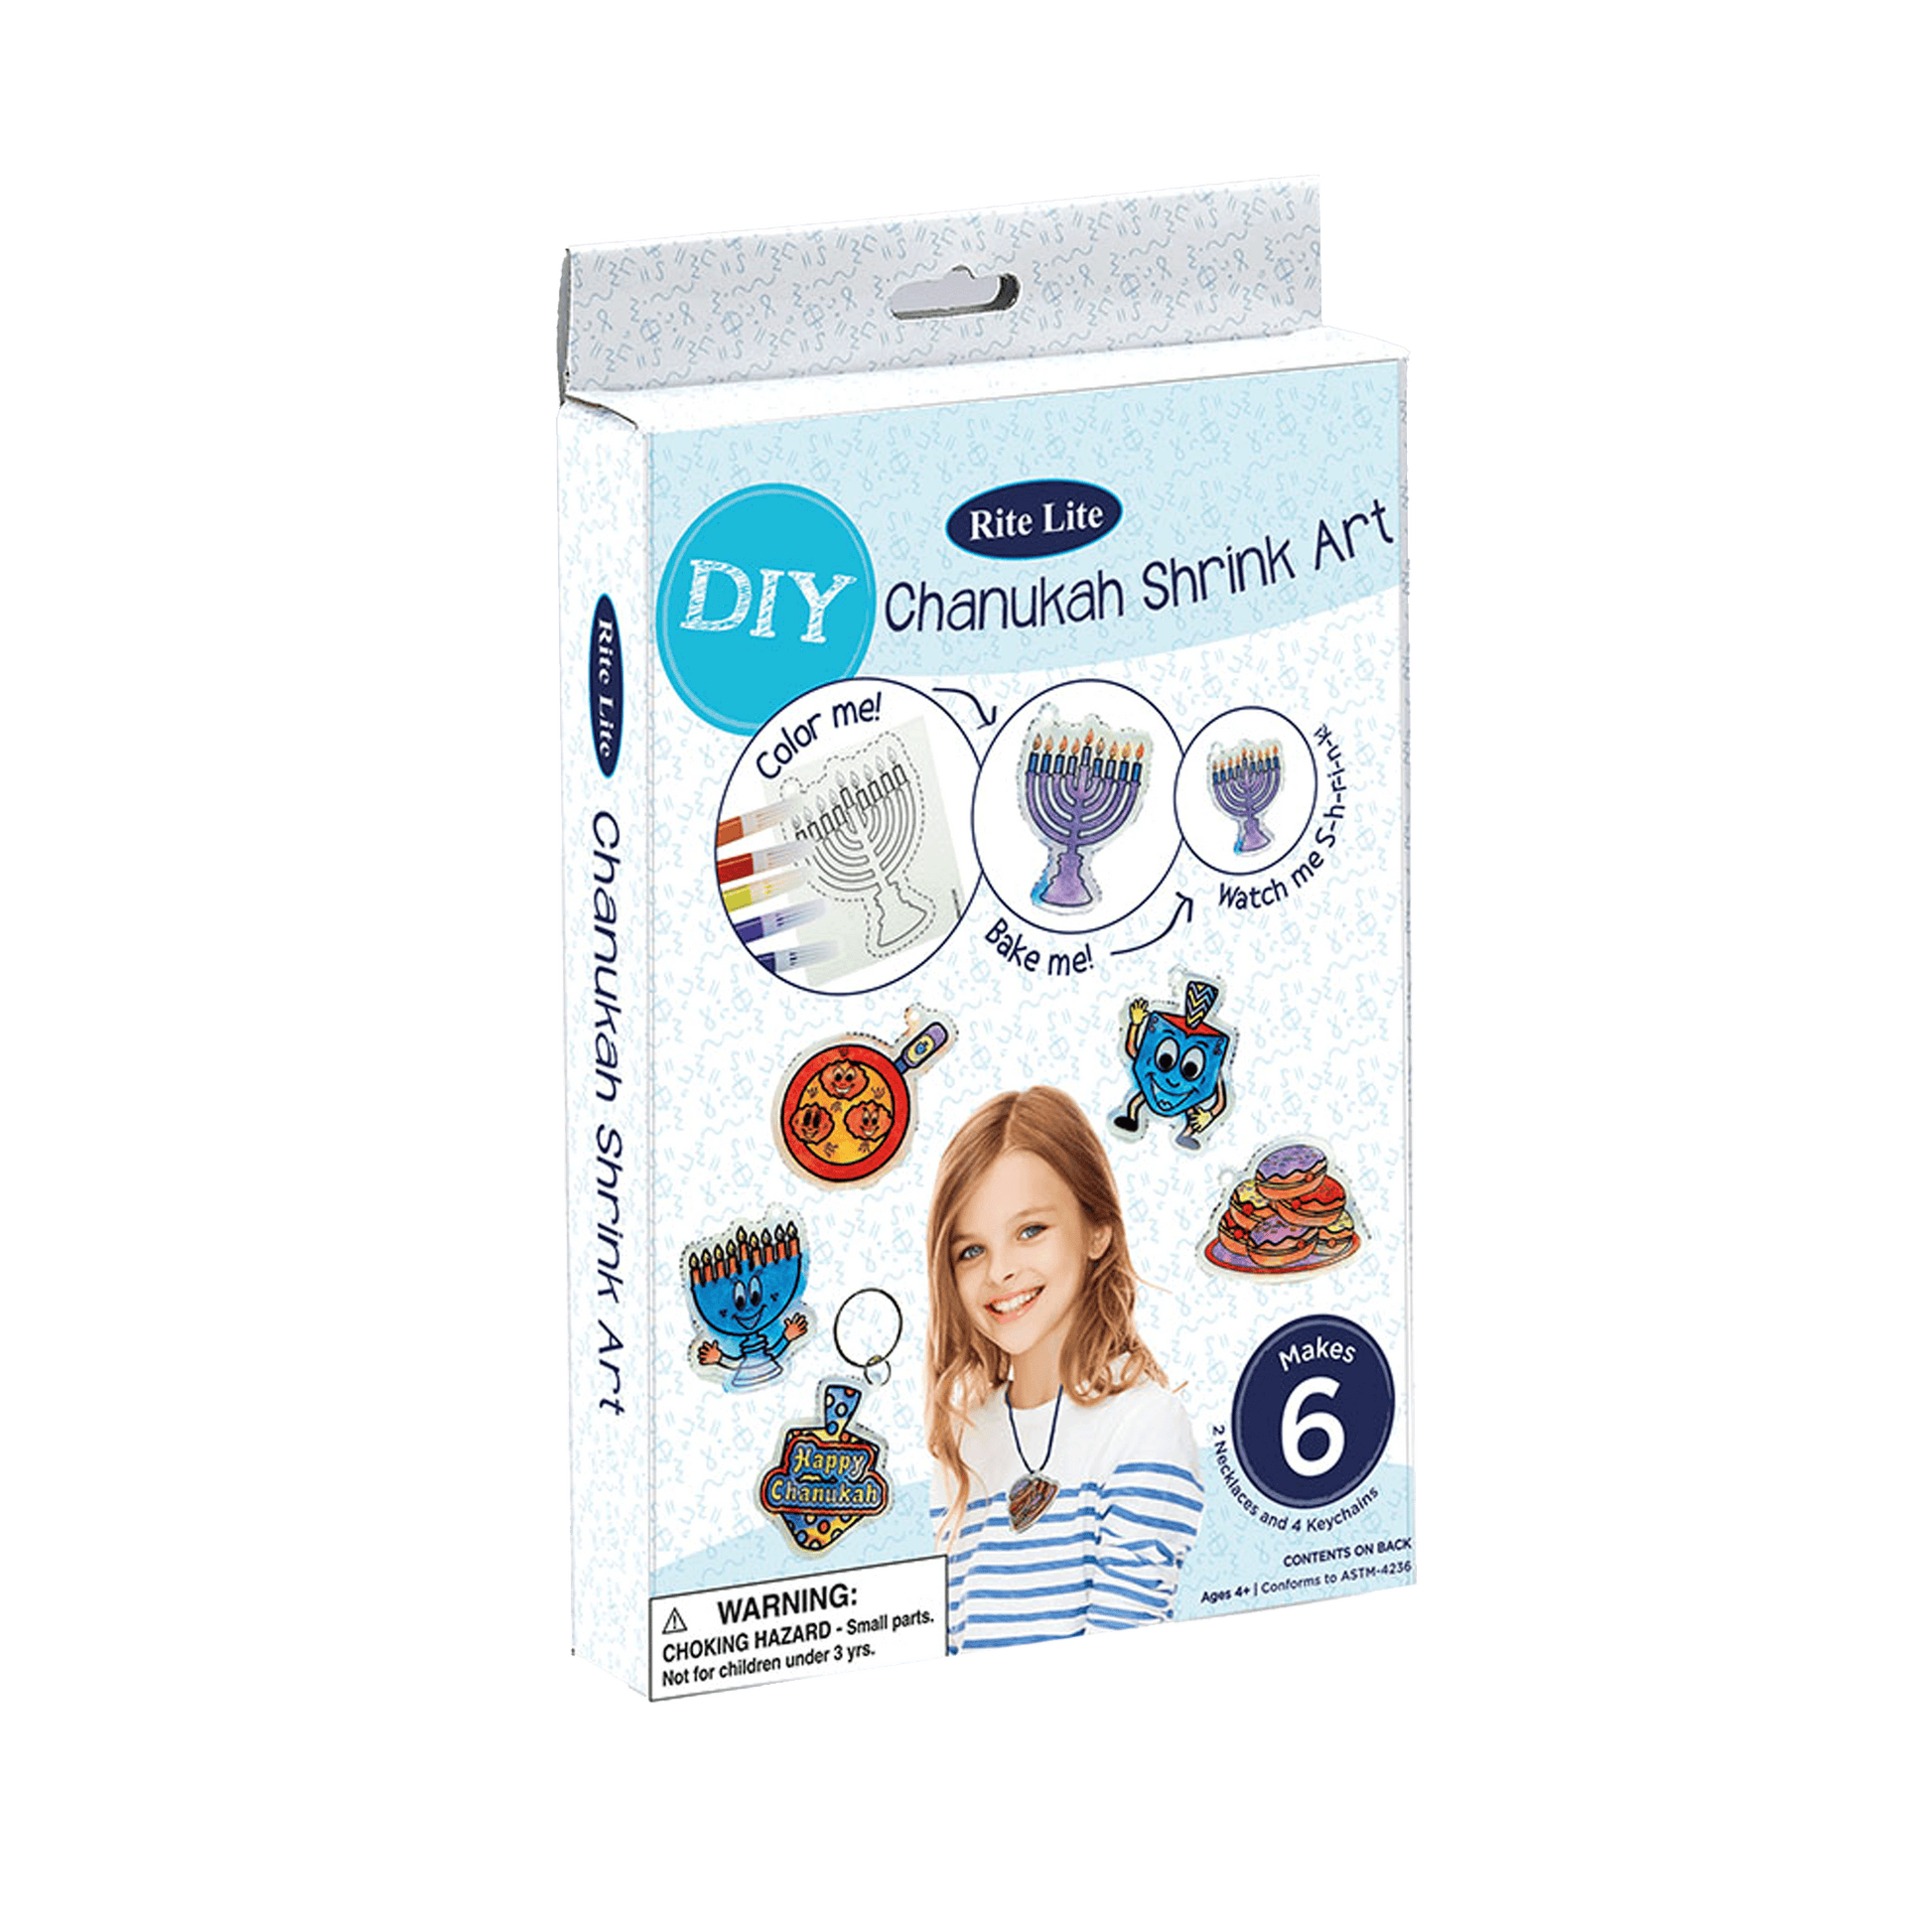 Rite Lite DIY Chanukah Shrink Art Kite with classic chanukah symbols and smiling little girl wearing shirk art necklace 